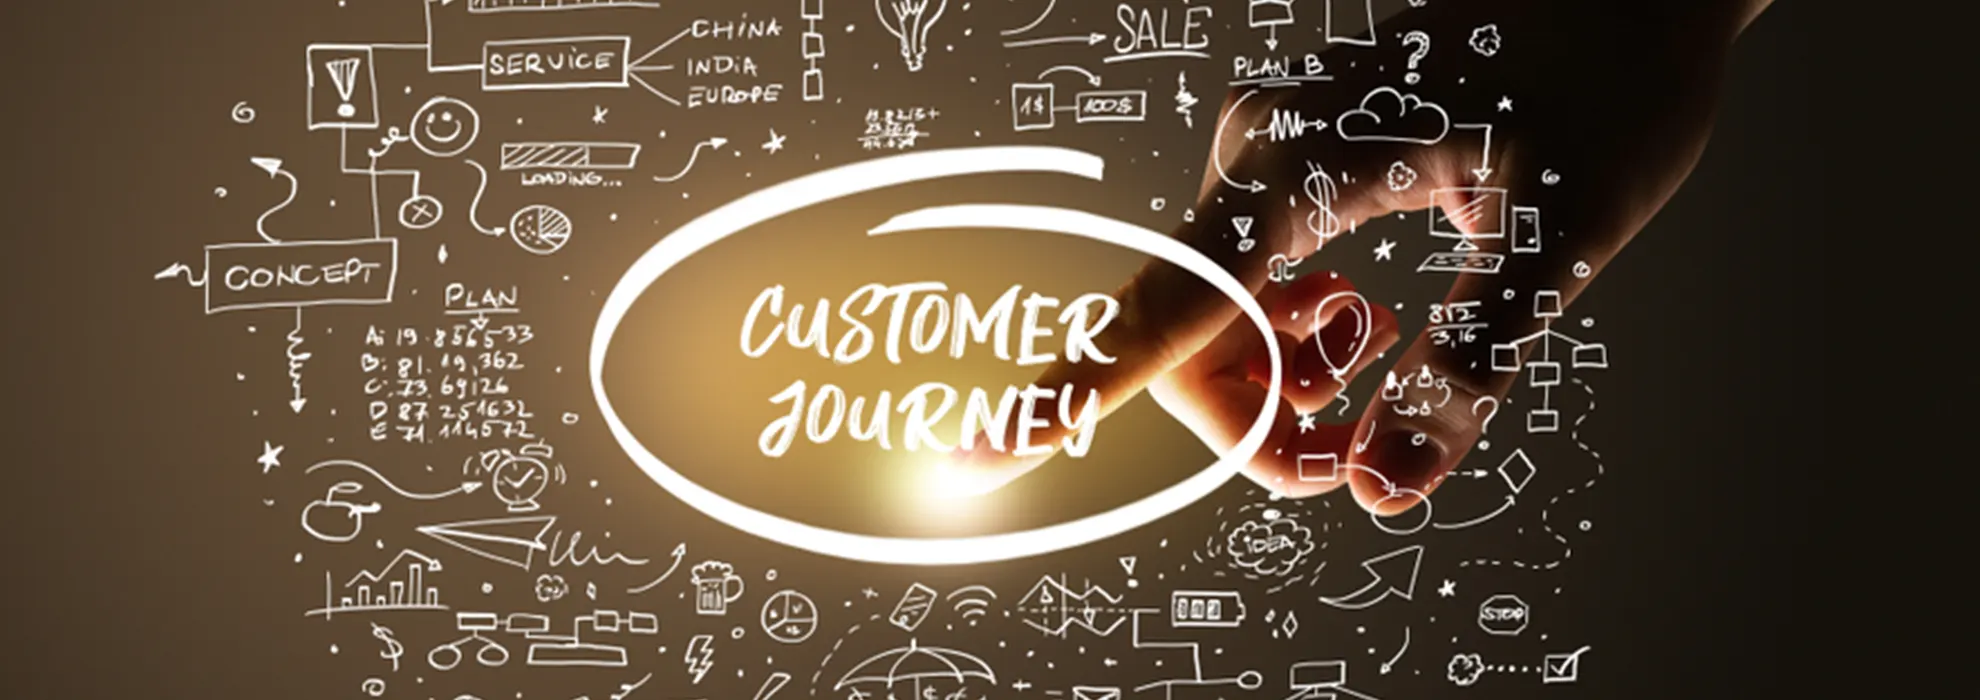 The Future Of The Customer Journey For Retailers